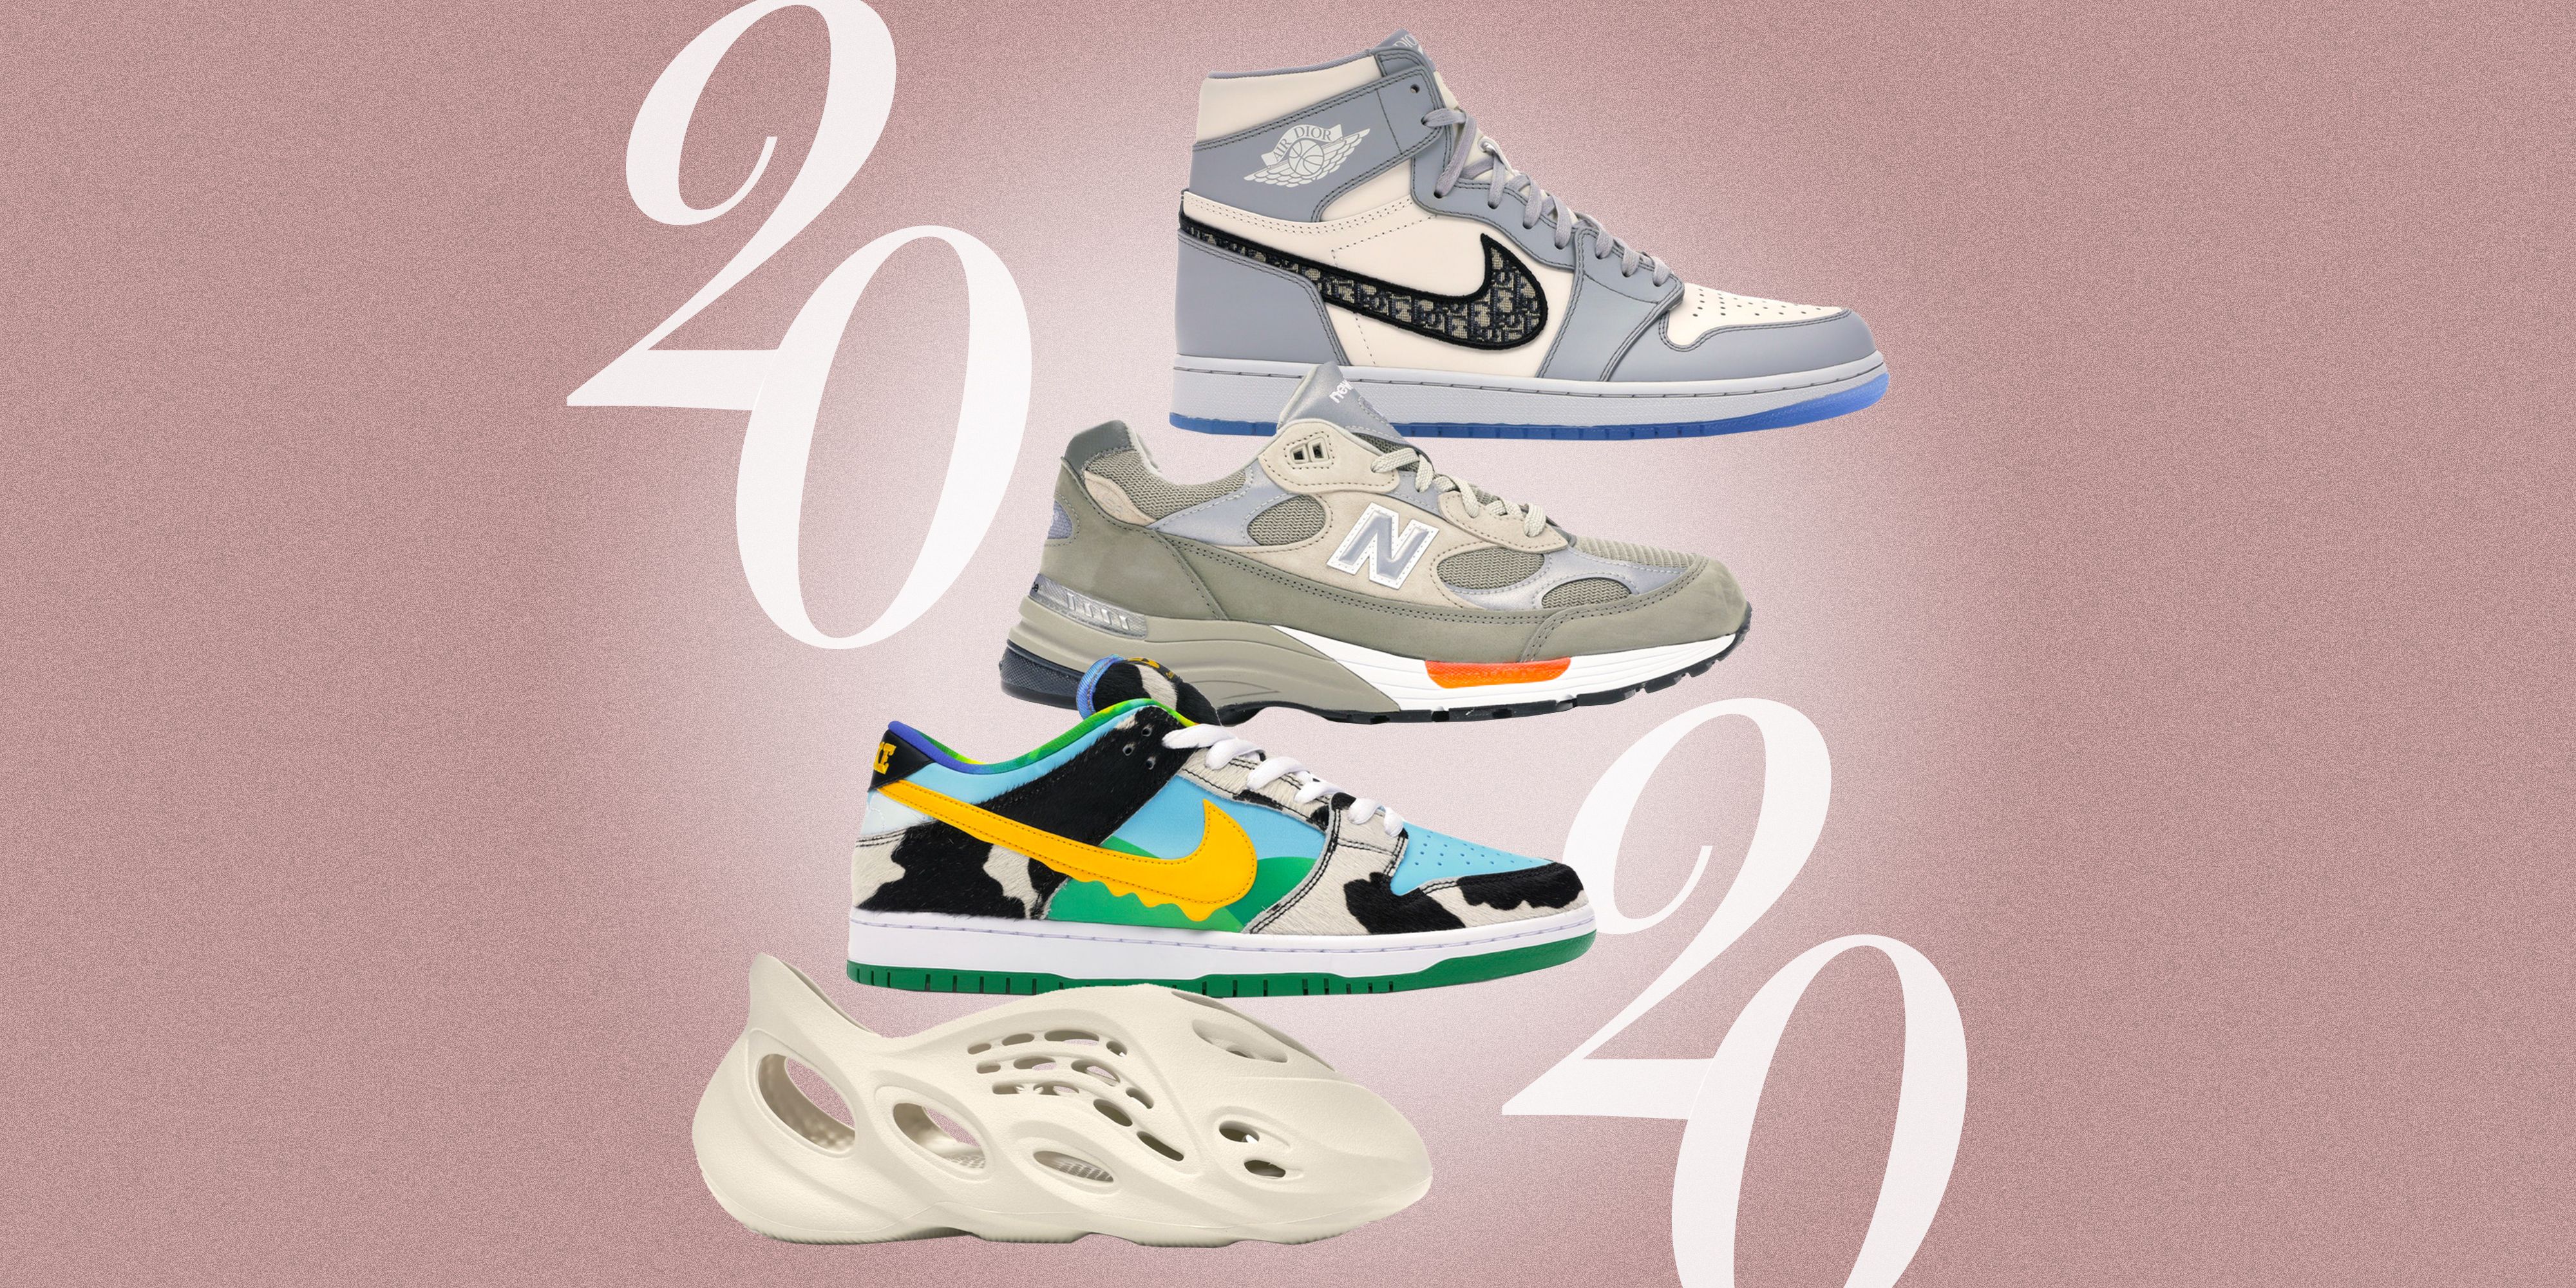 Sneakers of 2020 for - Coolest for